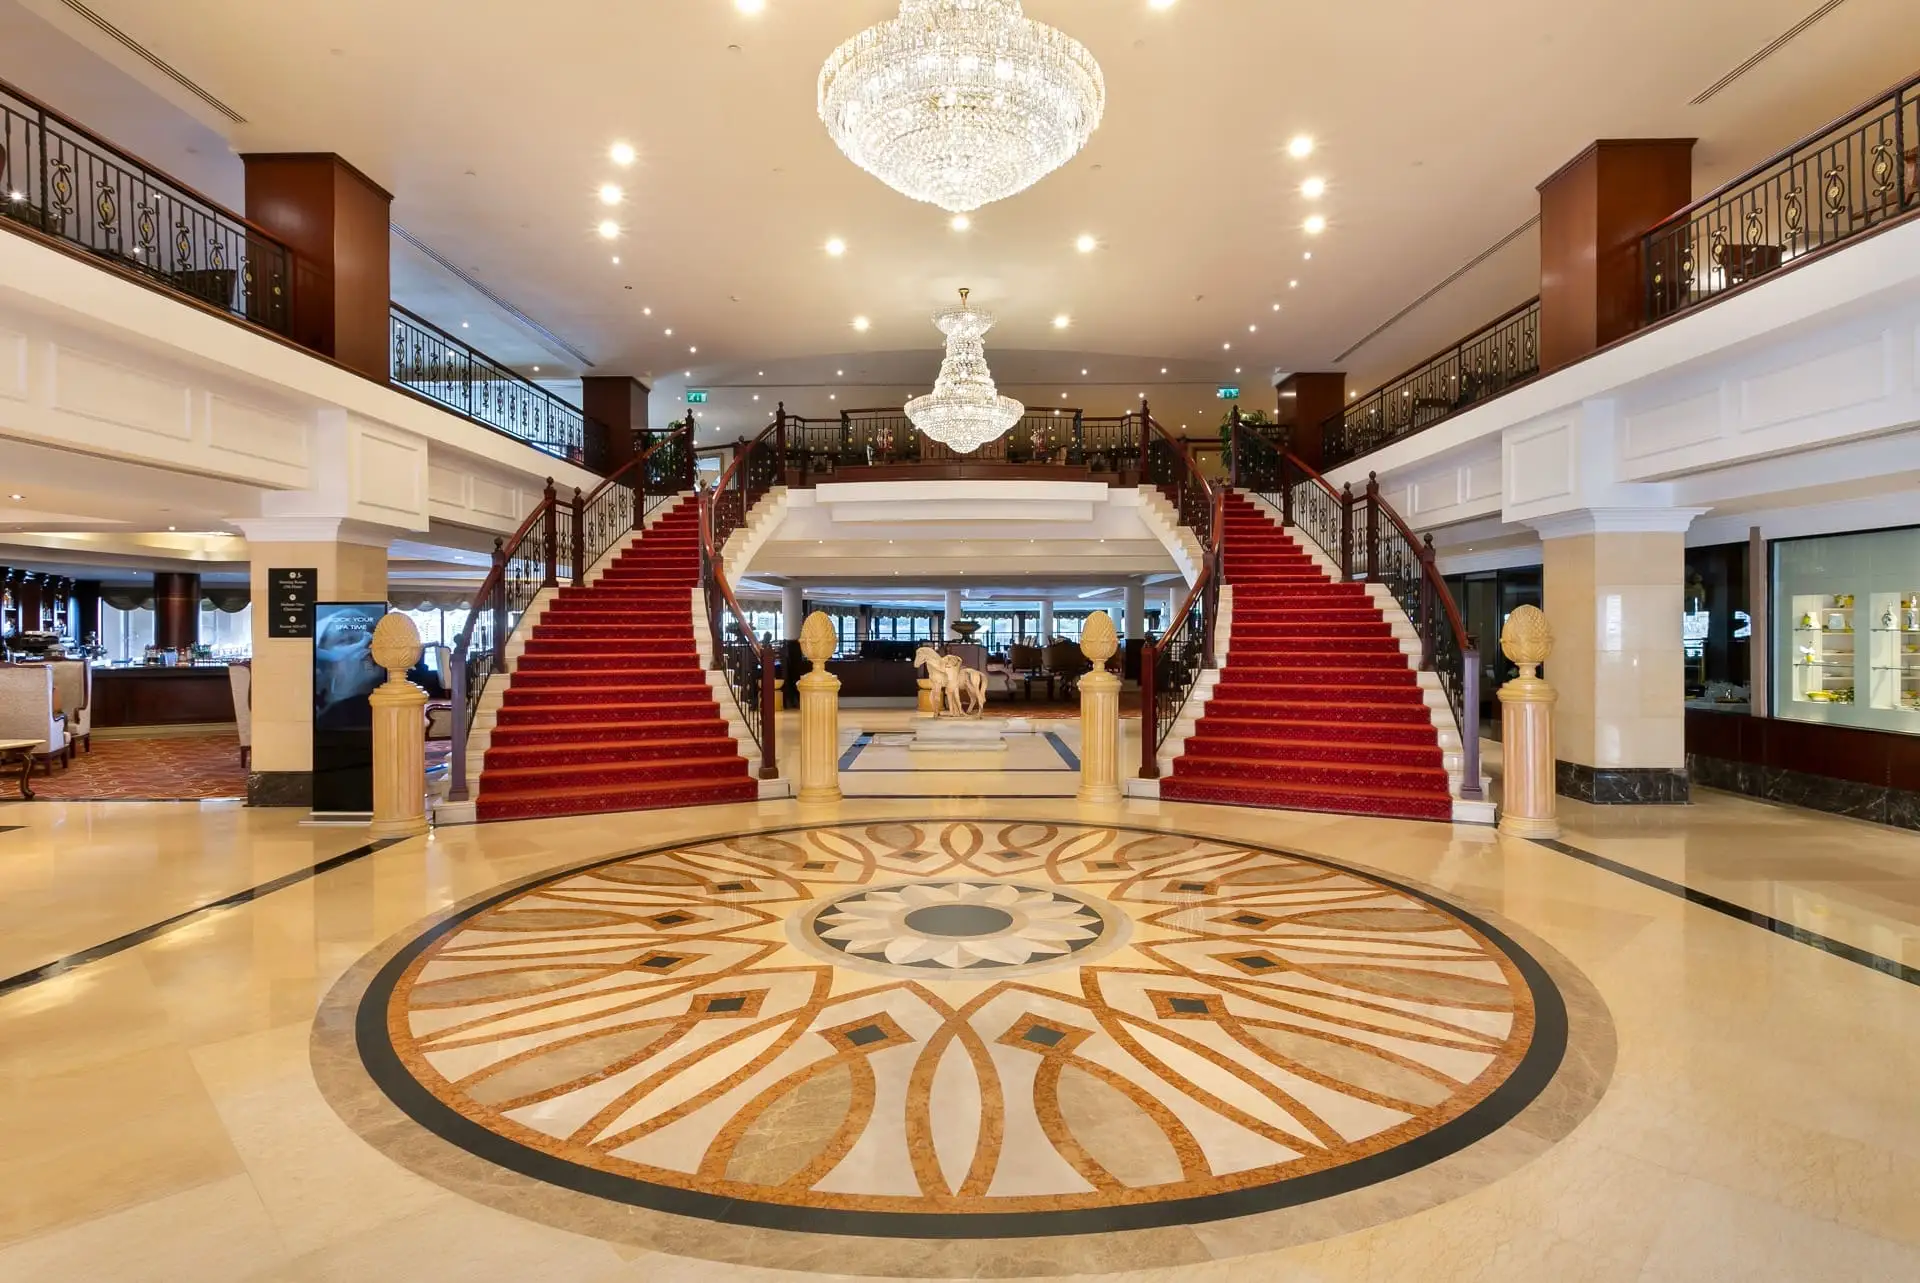 Double staircase with red carpet at the 5-star Grand Hotel Excelsior